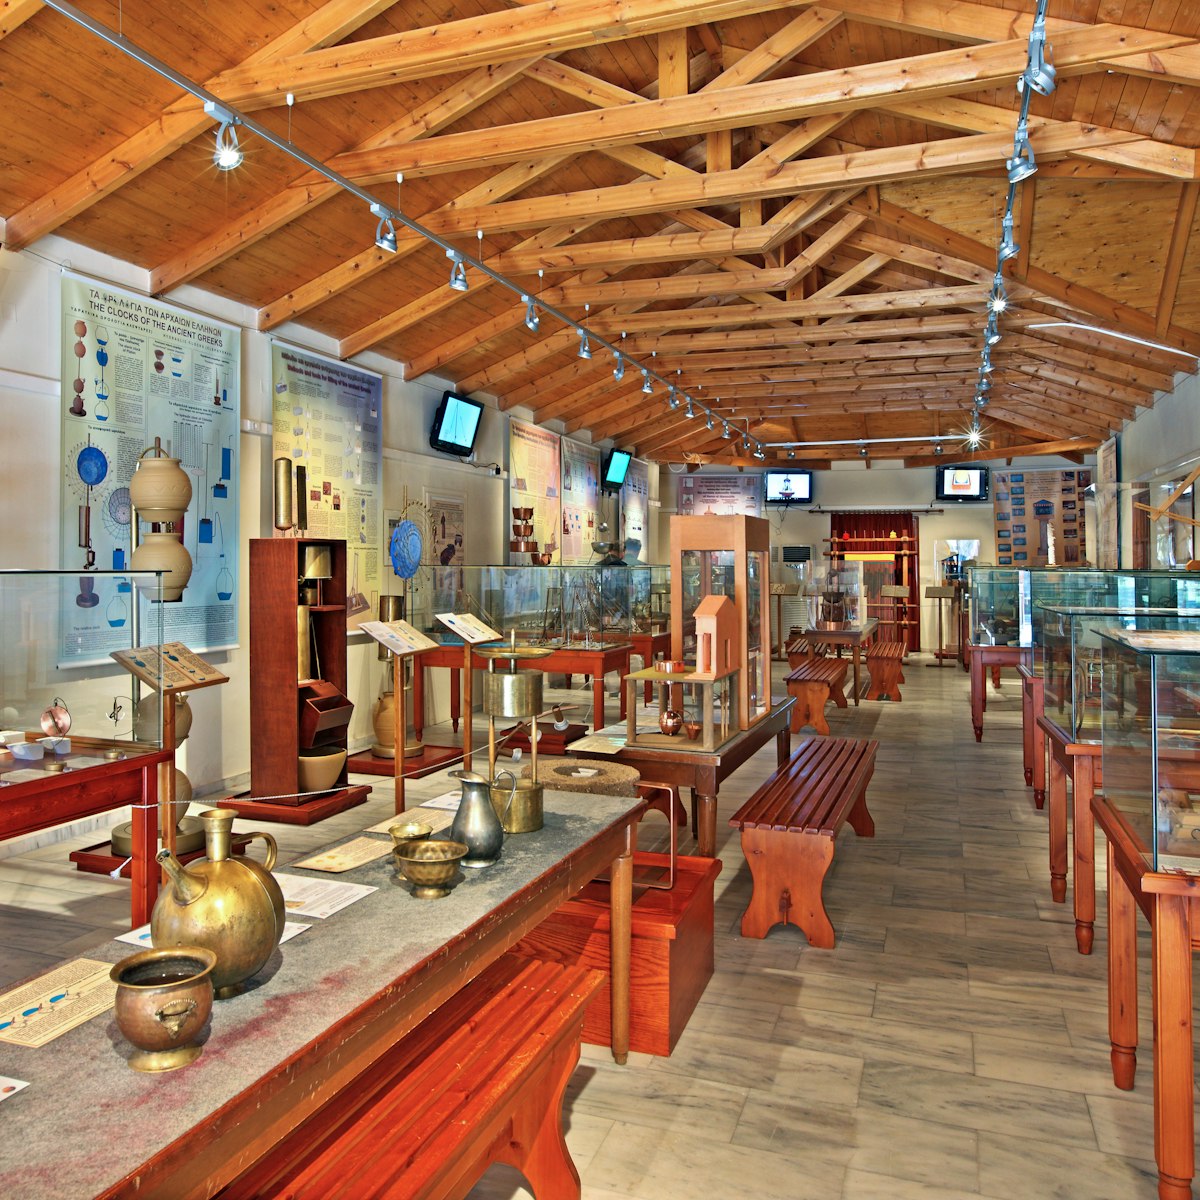 The museum of Ancient Greek Technology by Kostas Kotsanas.